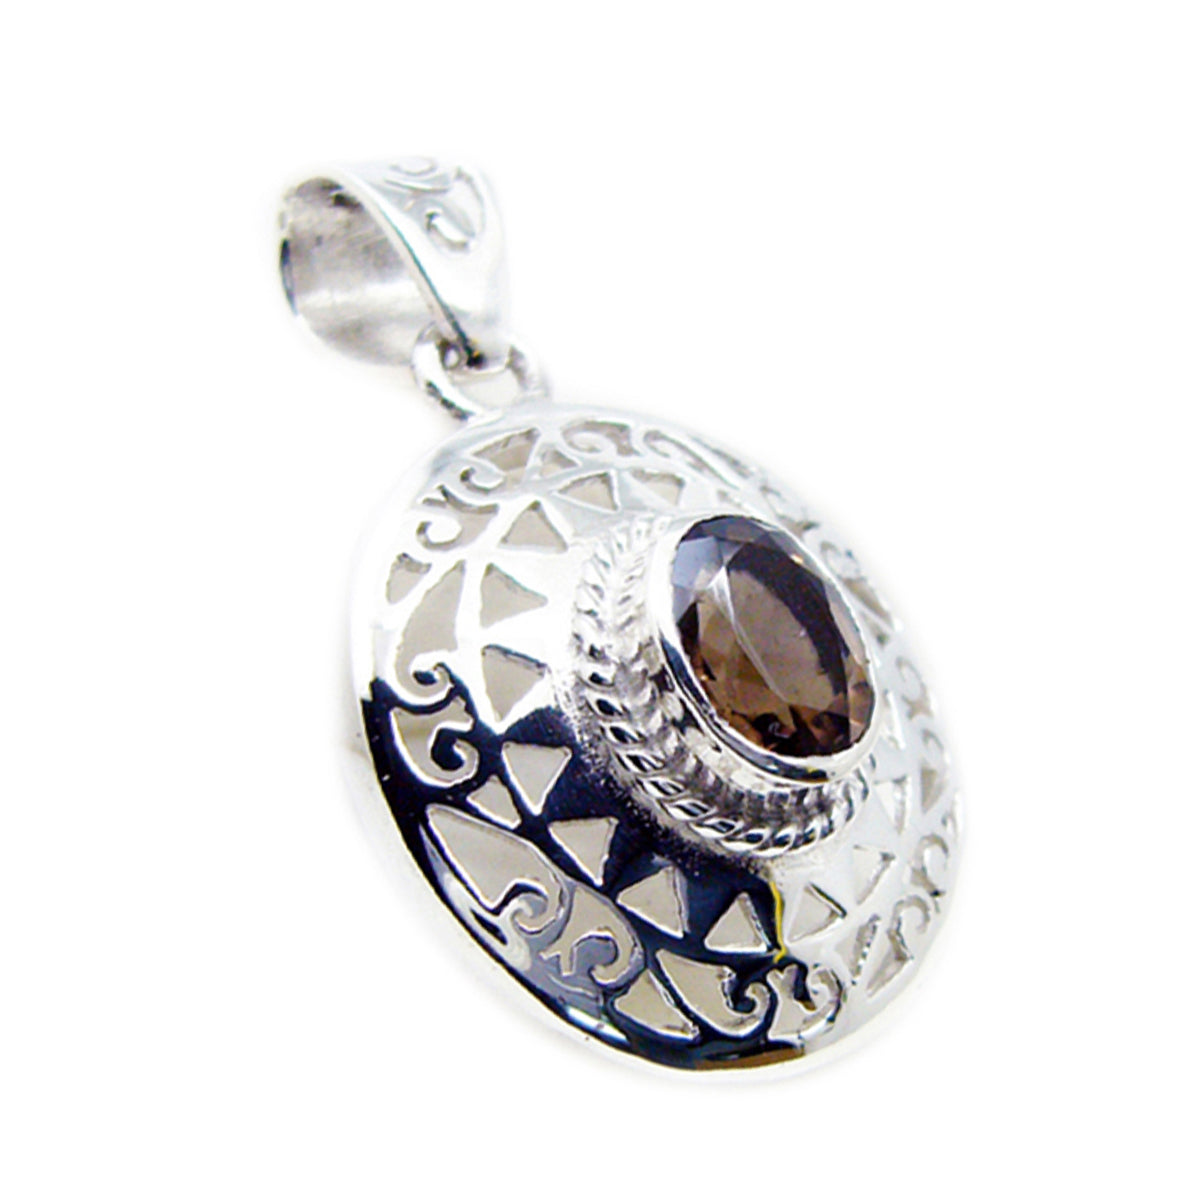 Riyo Good Gems Round Faceted Brown Smoky Quartz Solid Silver Pendant Gift For Anniversary